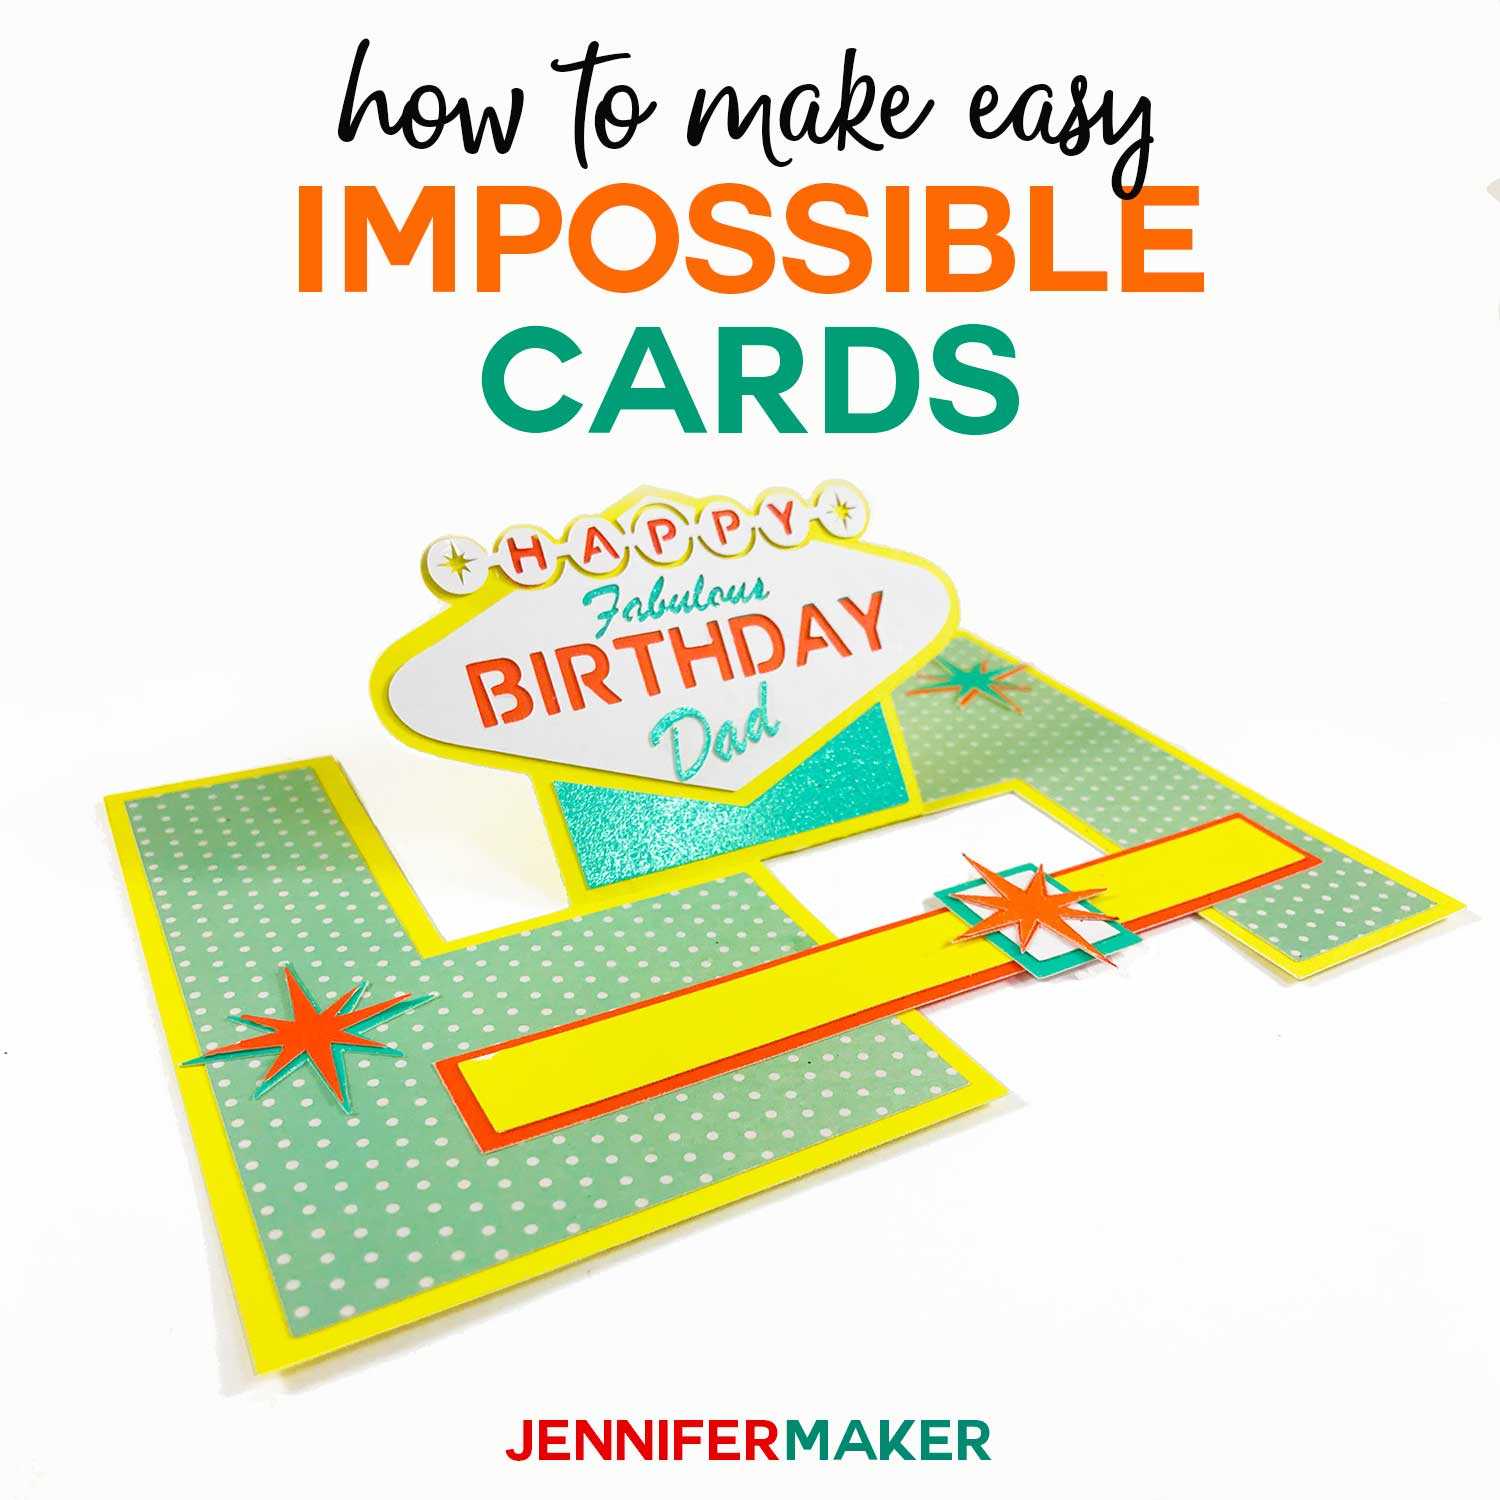 Impossible Card Templates: Super Easy Pop Up Cards Regarding Printable Pop Up Card Templates Free